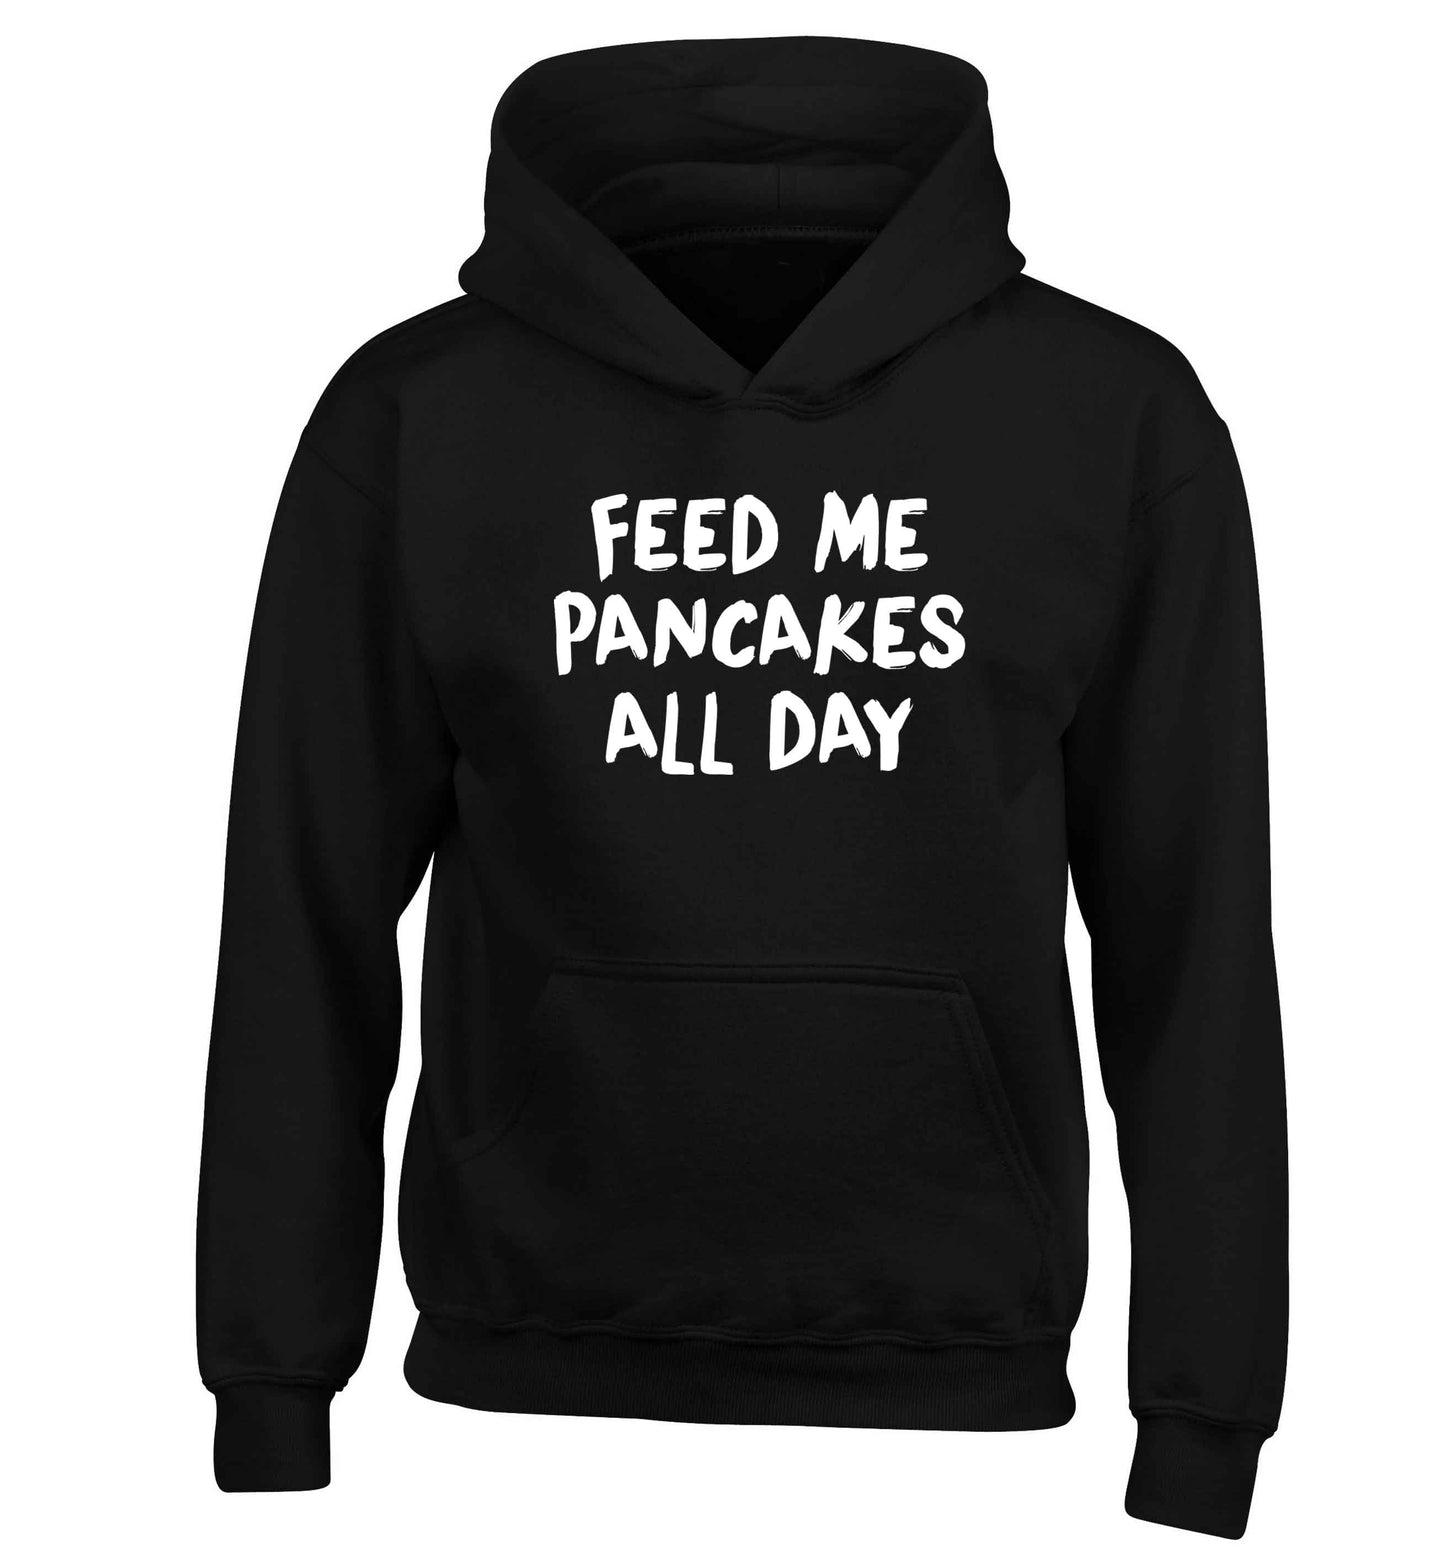 Feed me pancakes all day children's black hoodie 12-13 Years